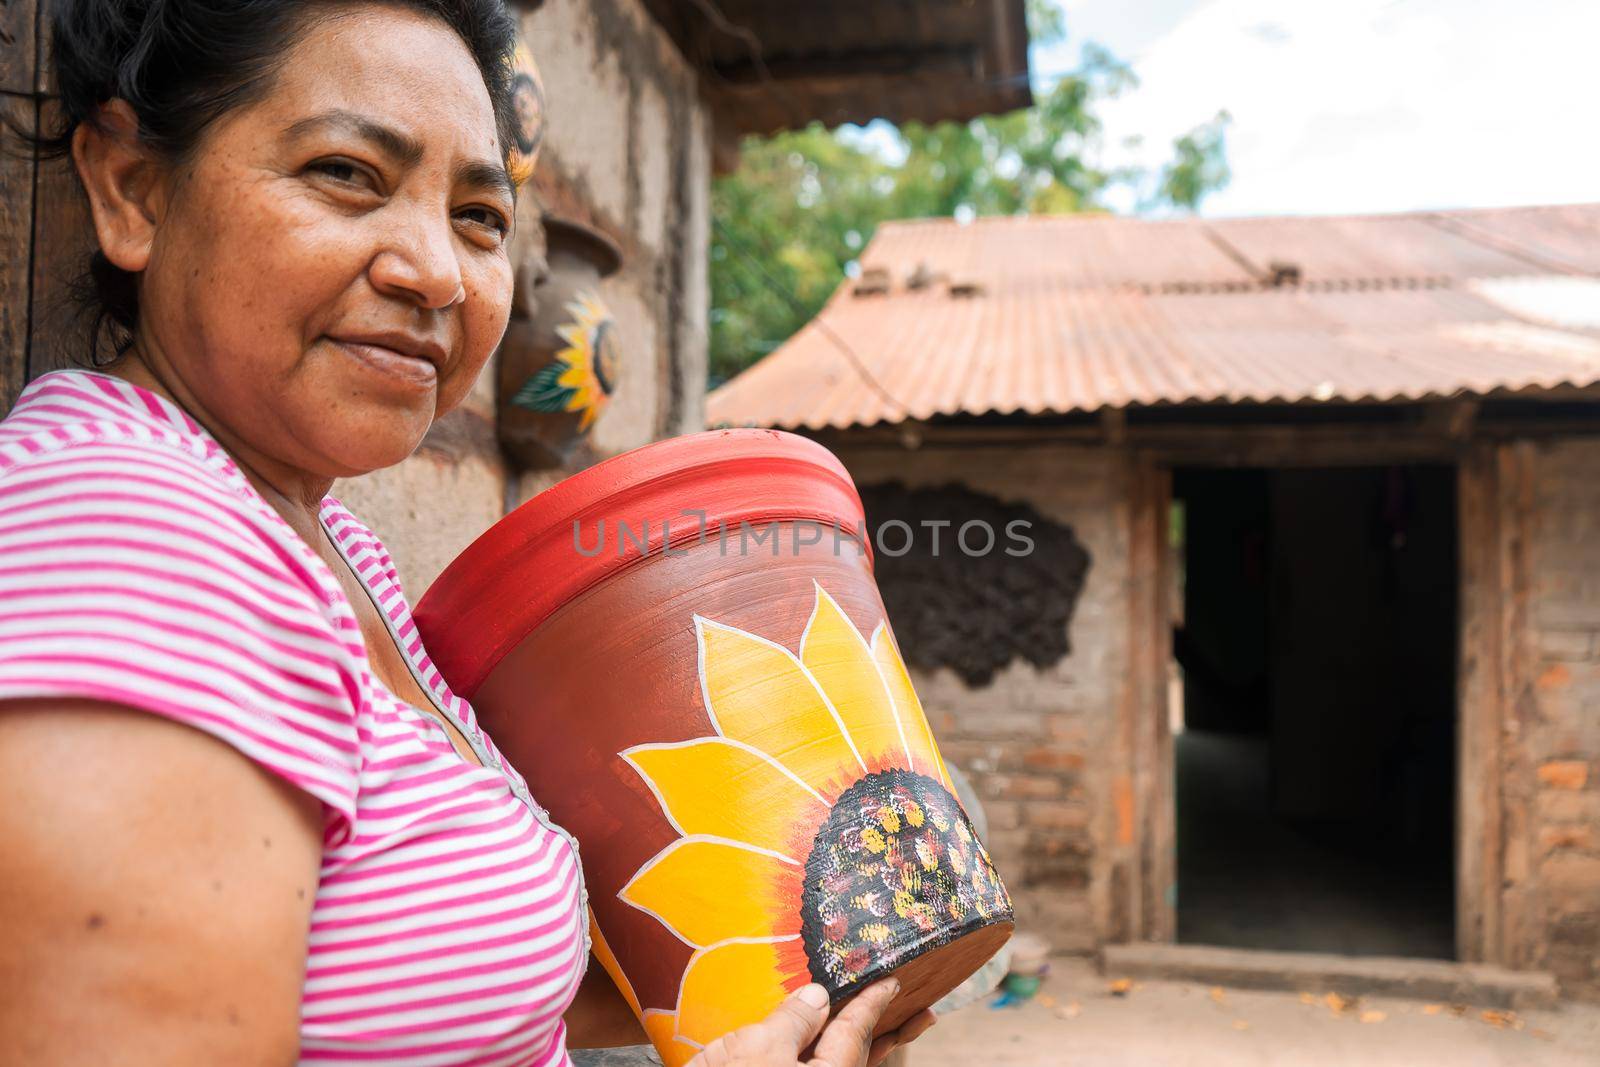 Artisan of La Paz Centro Nicaragua smiling at the camera and holding a clay vase by cfalvarez